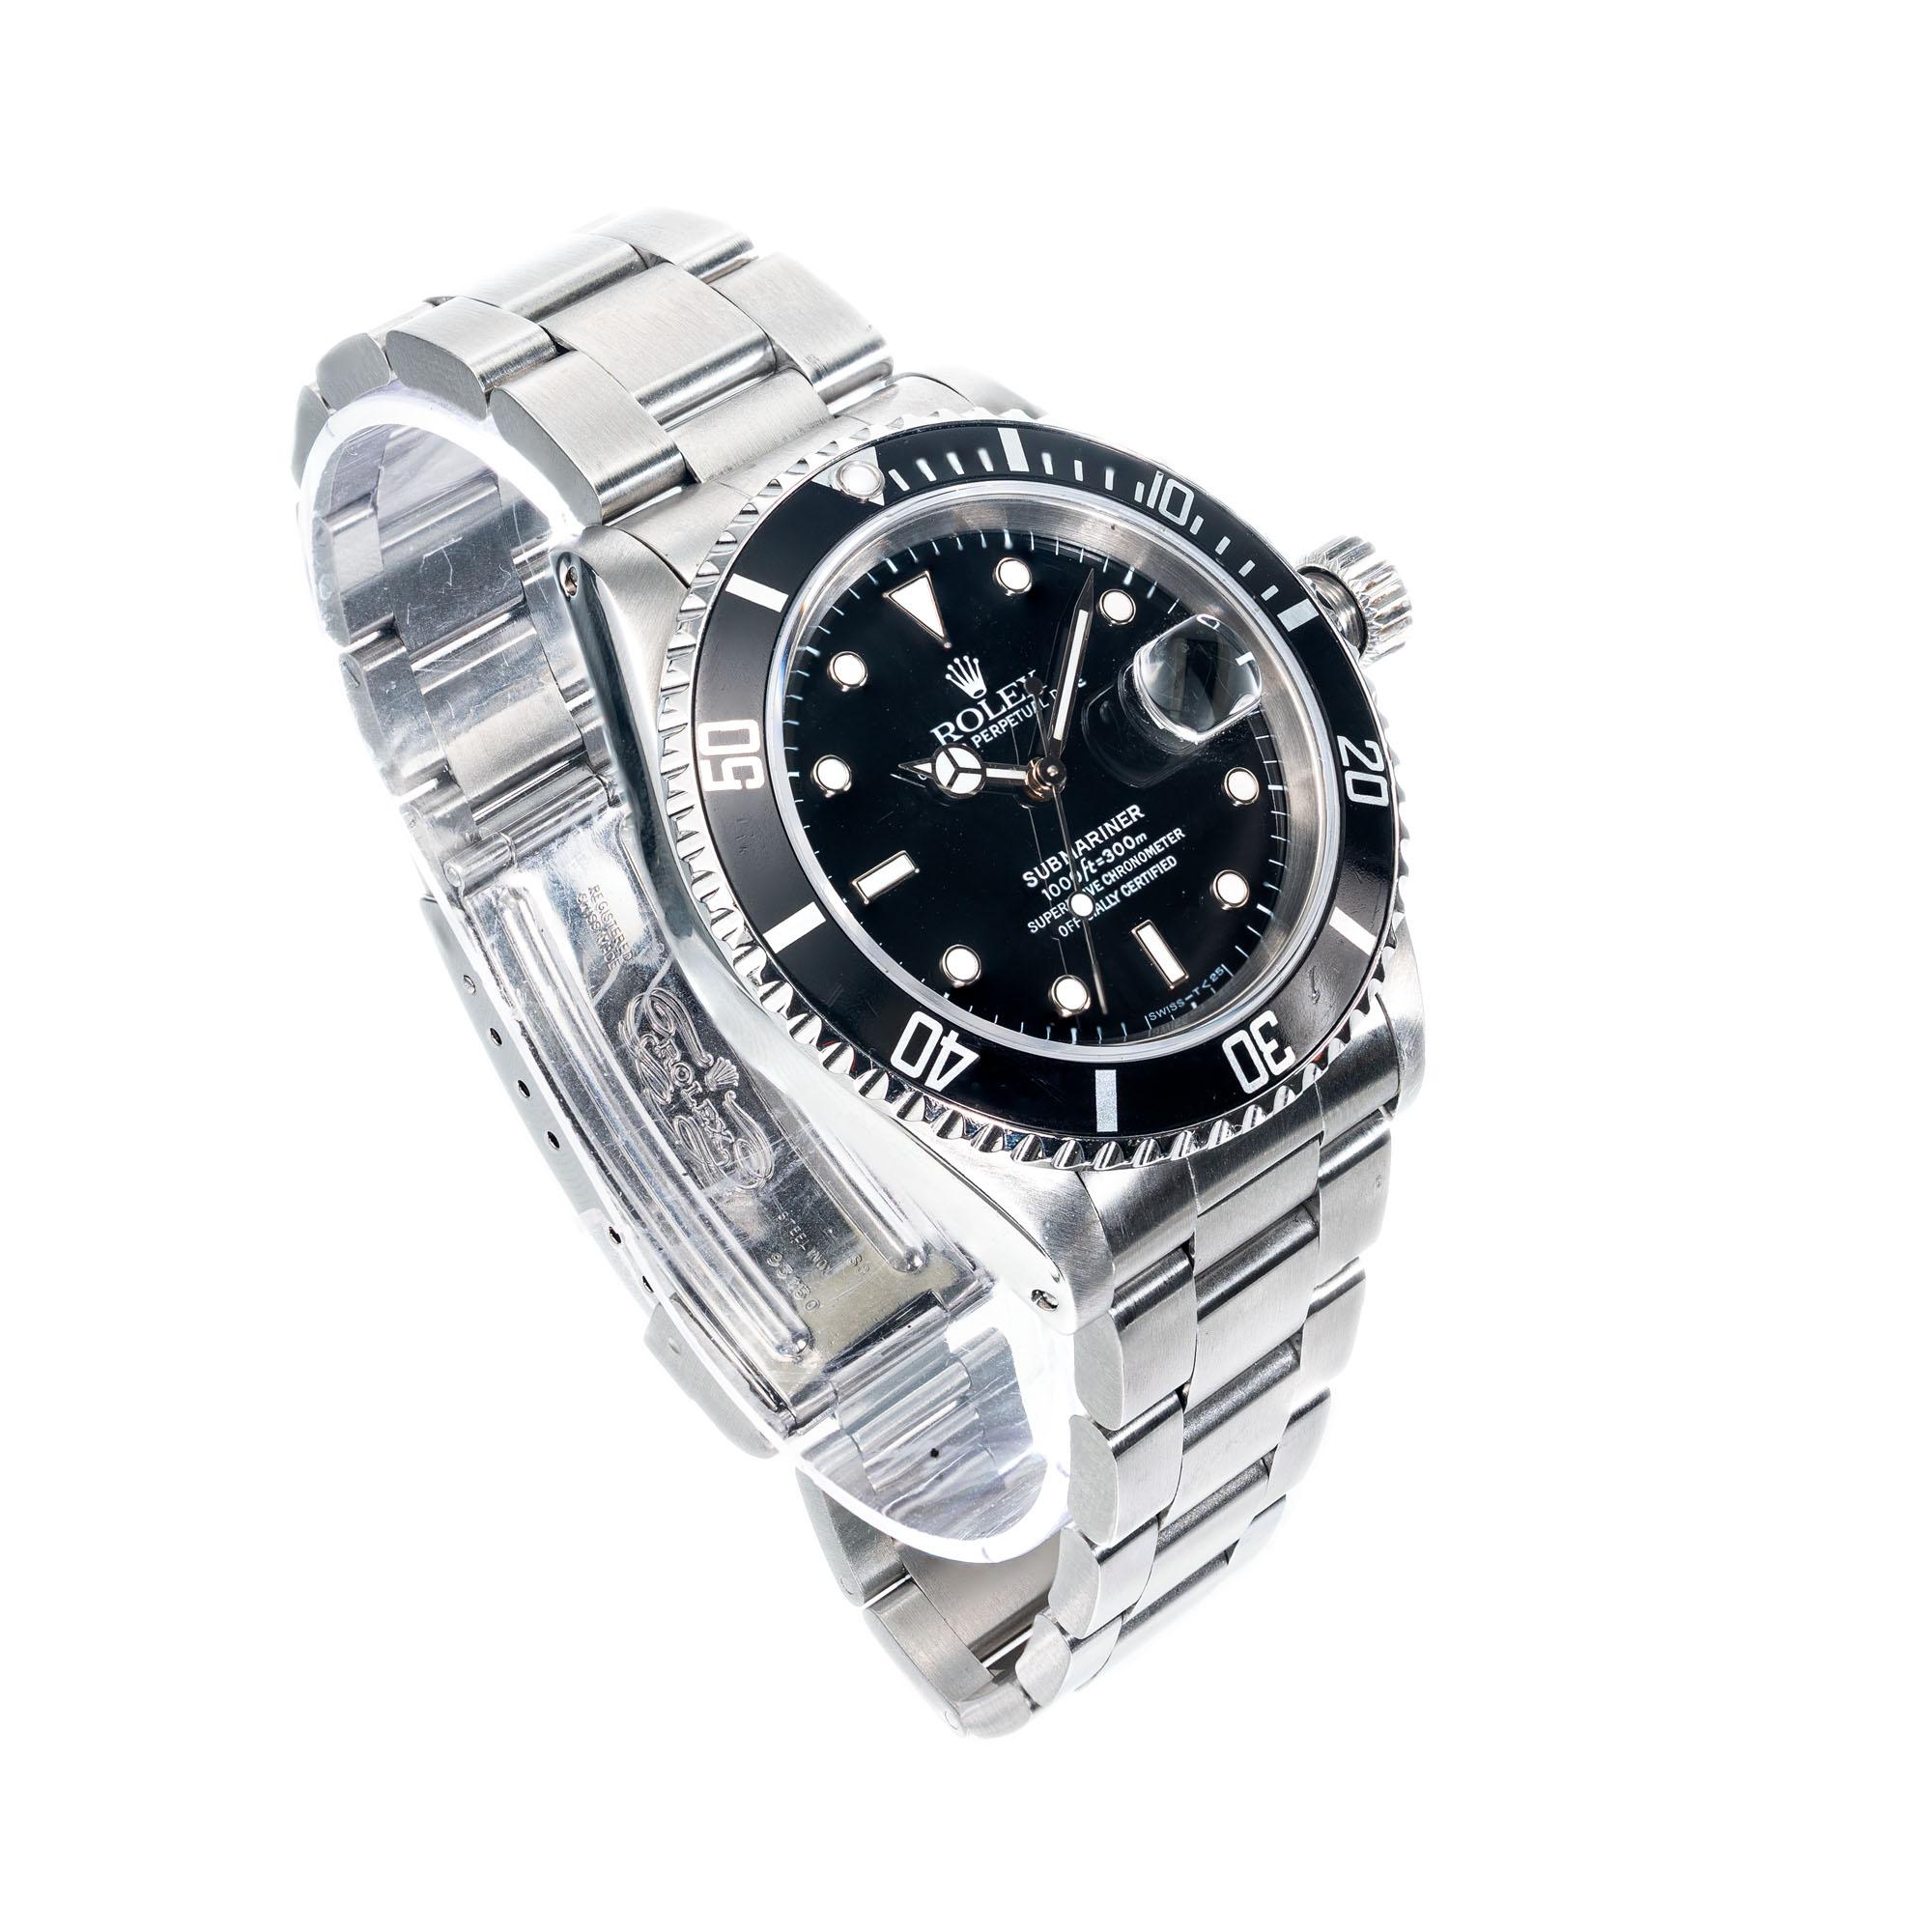 Men's Rolex submariner stainless steel, oyster band wristwatch. 8.75 Inches. model 16610 circa 1994.  

Length: 47.27mm
Width: 40mm
Band width at case: 20mm
Case thickness: 12.56mm
Crystal: sapphire
Dial: black
Other: Model 16610 Serial #